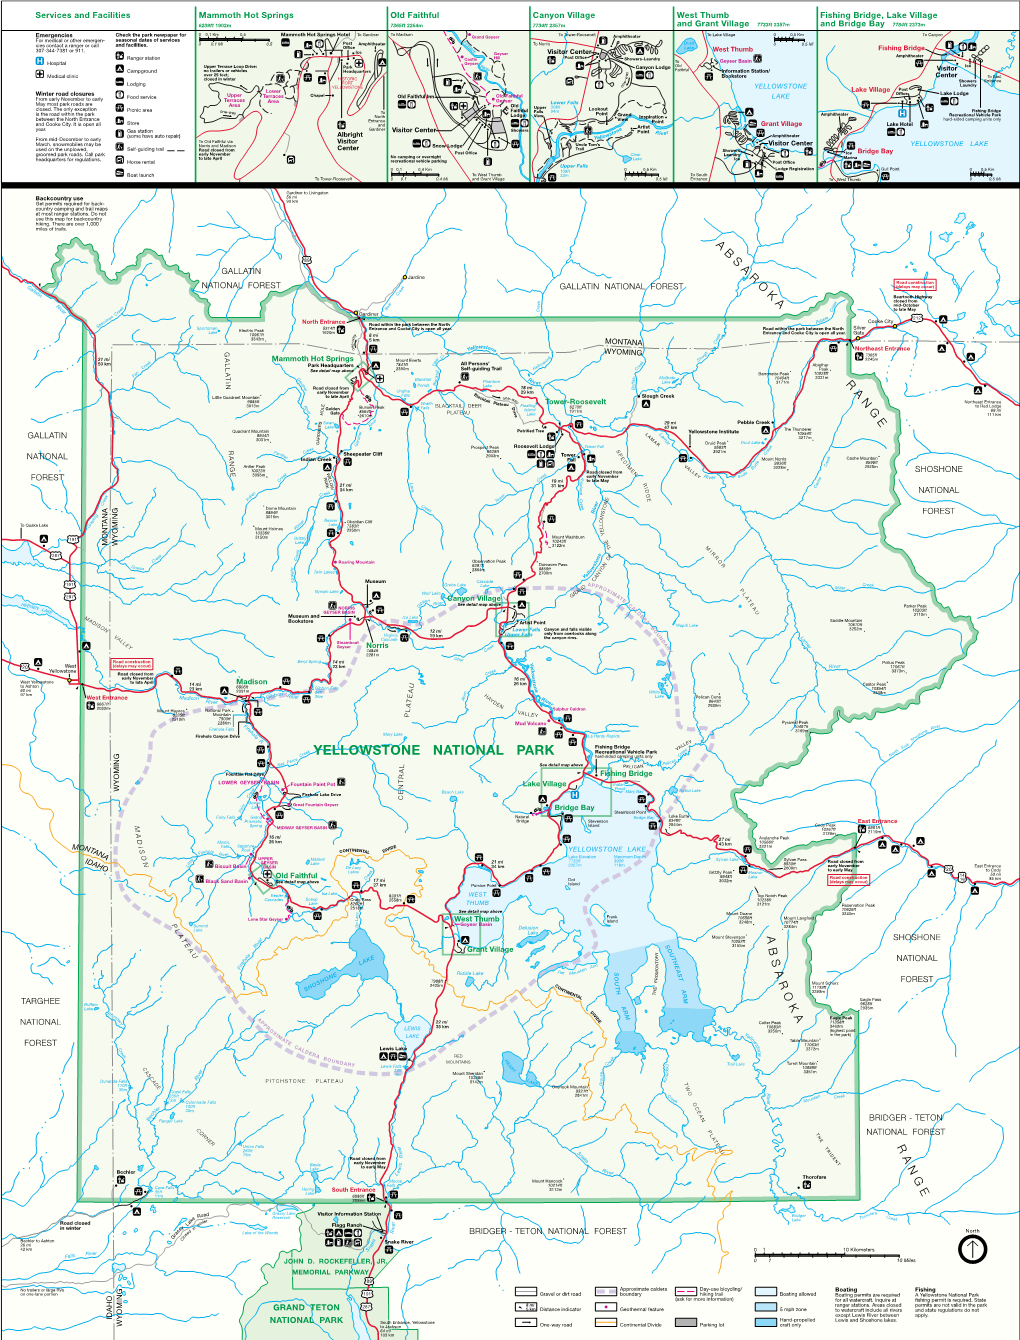 YELLOWSTONE NATIONAL PARK Re O C Hard-Sided Camping Units Only C N Ce Per Ica N Nez See Detail Map Above Pel L PELIC a N Fountain Flat Drive a Fishing Bridge